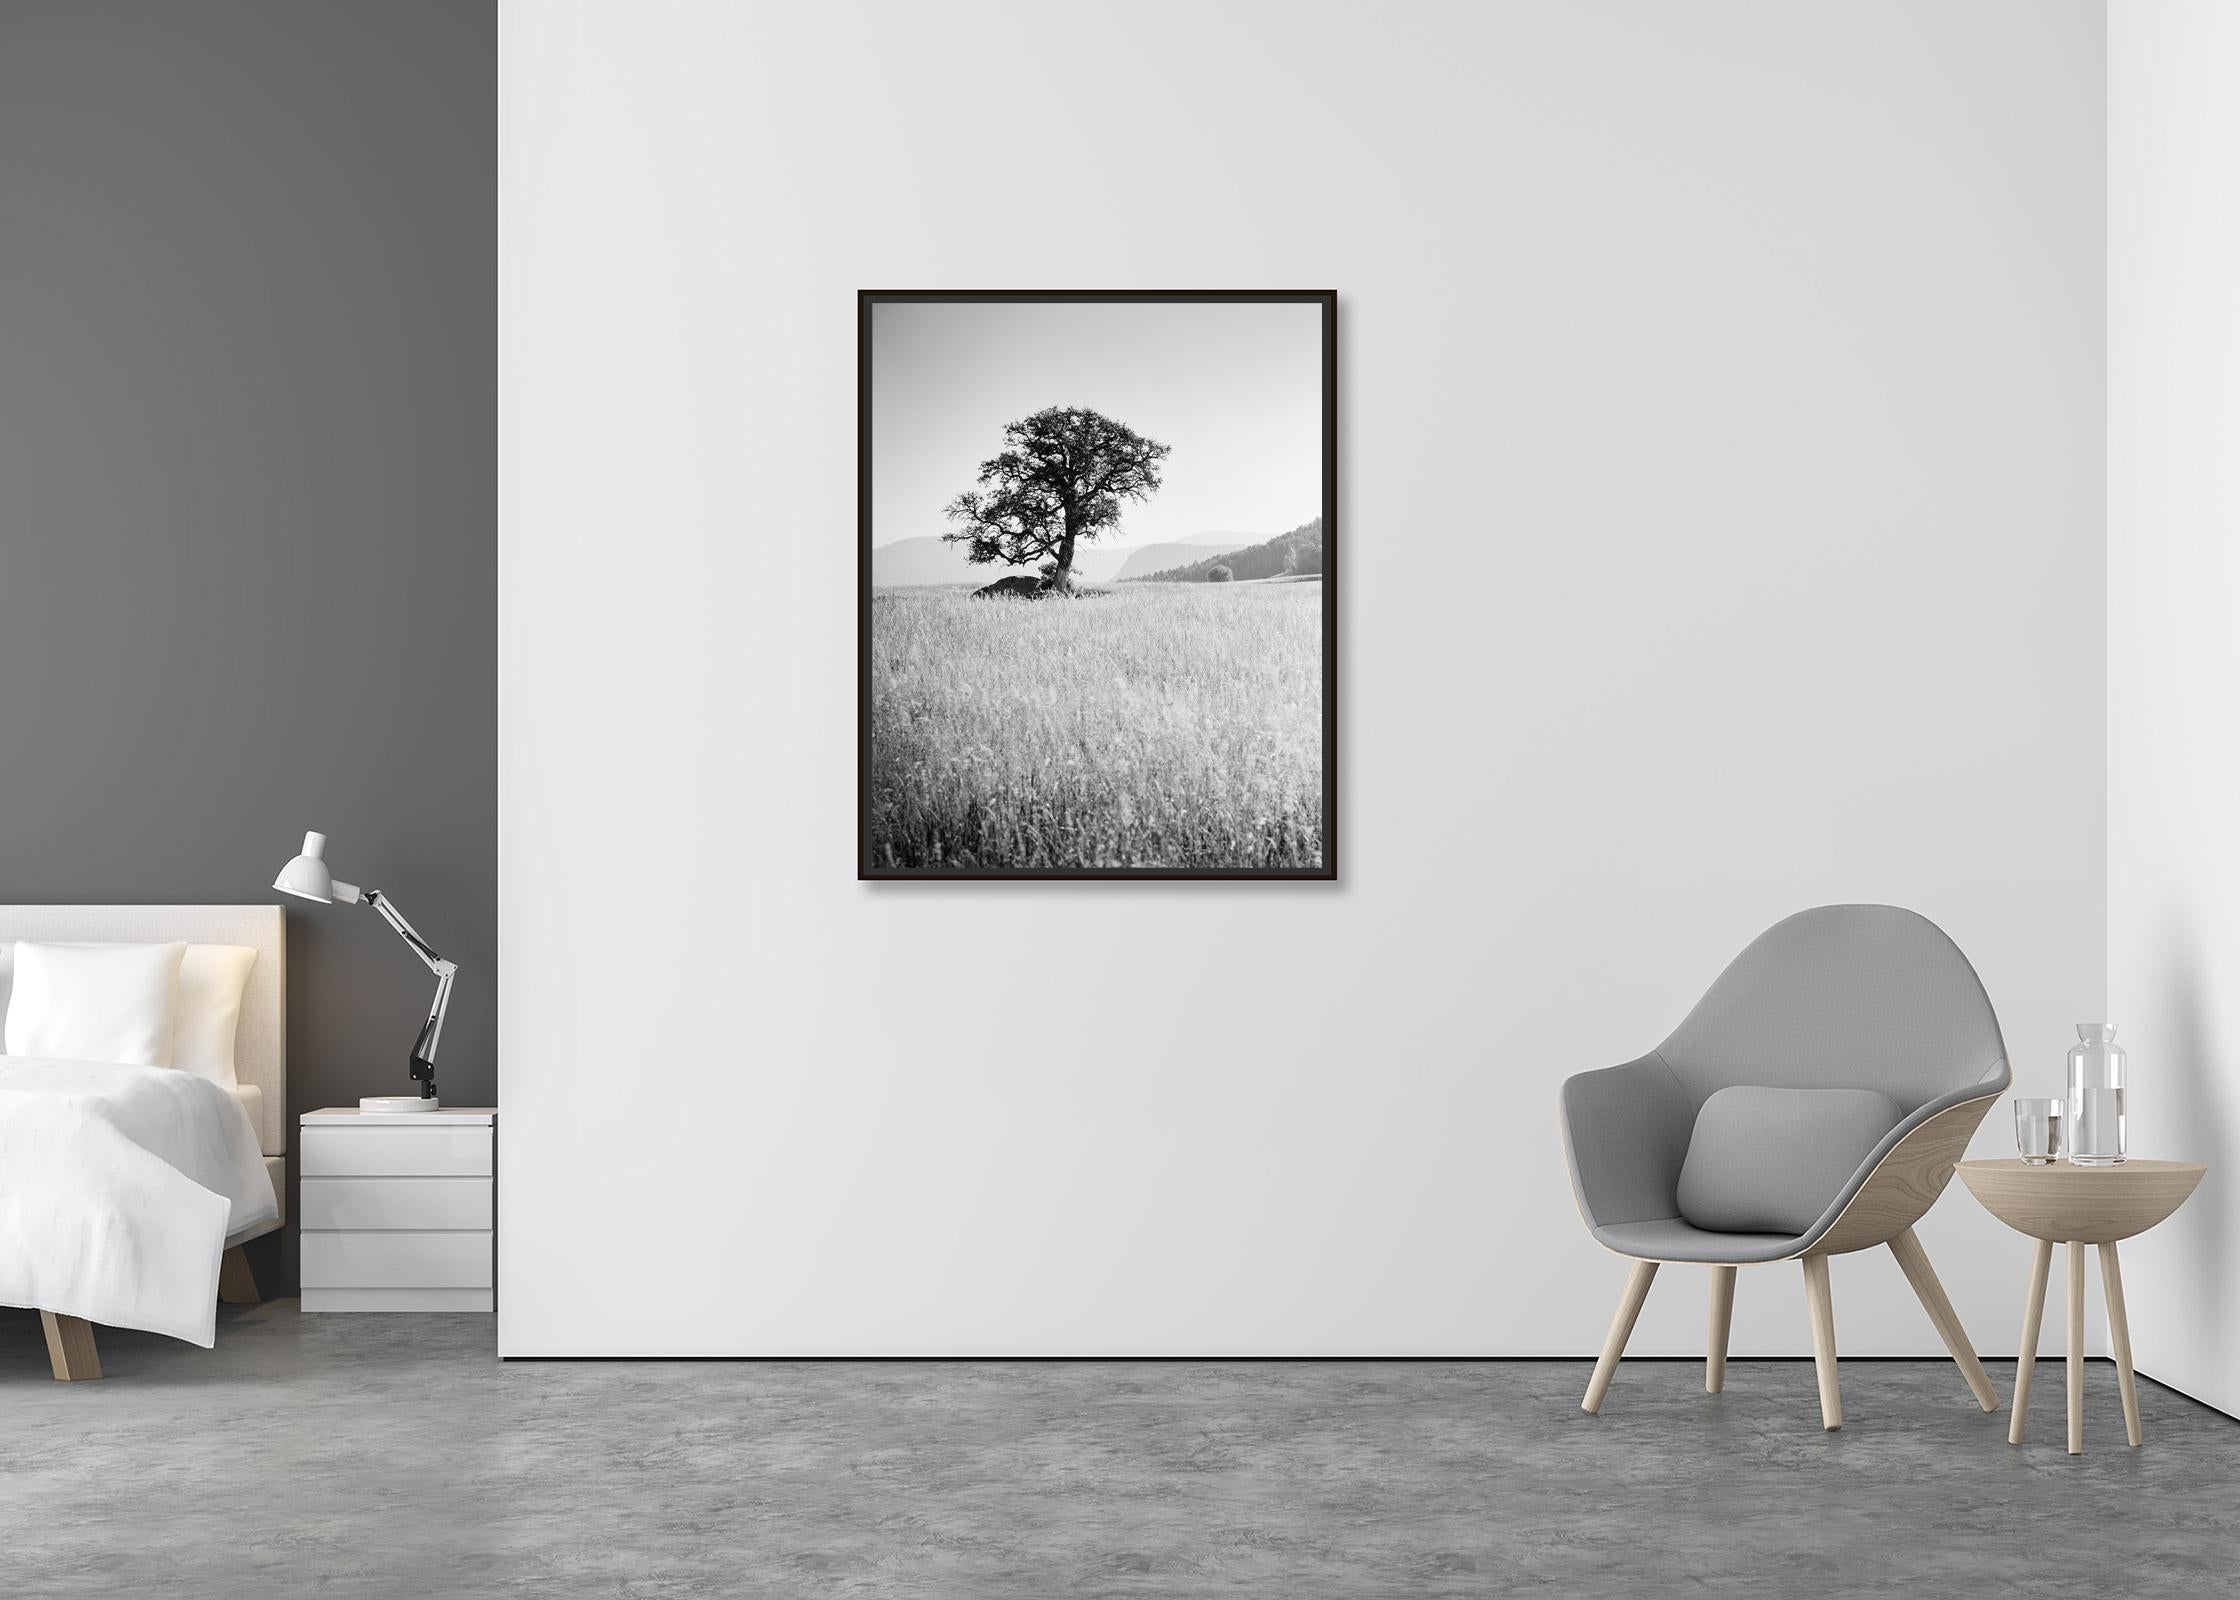 Morning Sun, single tree, Seiser Alm, black and white landscape, art photography - Contemporary Photograph by Gerald Berghammer